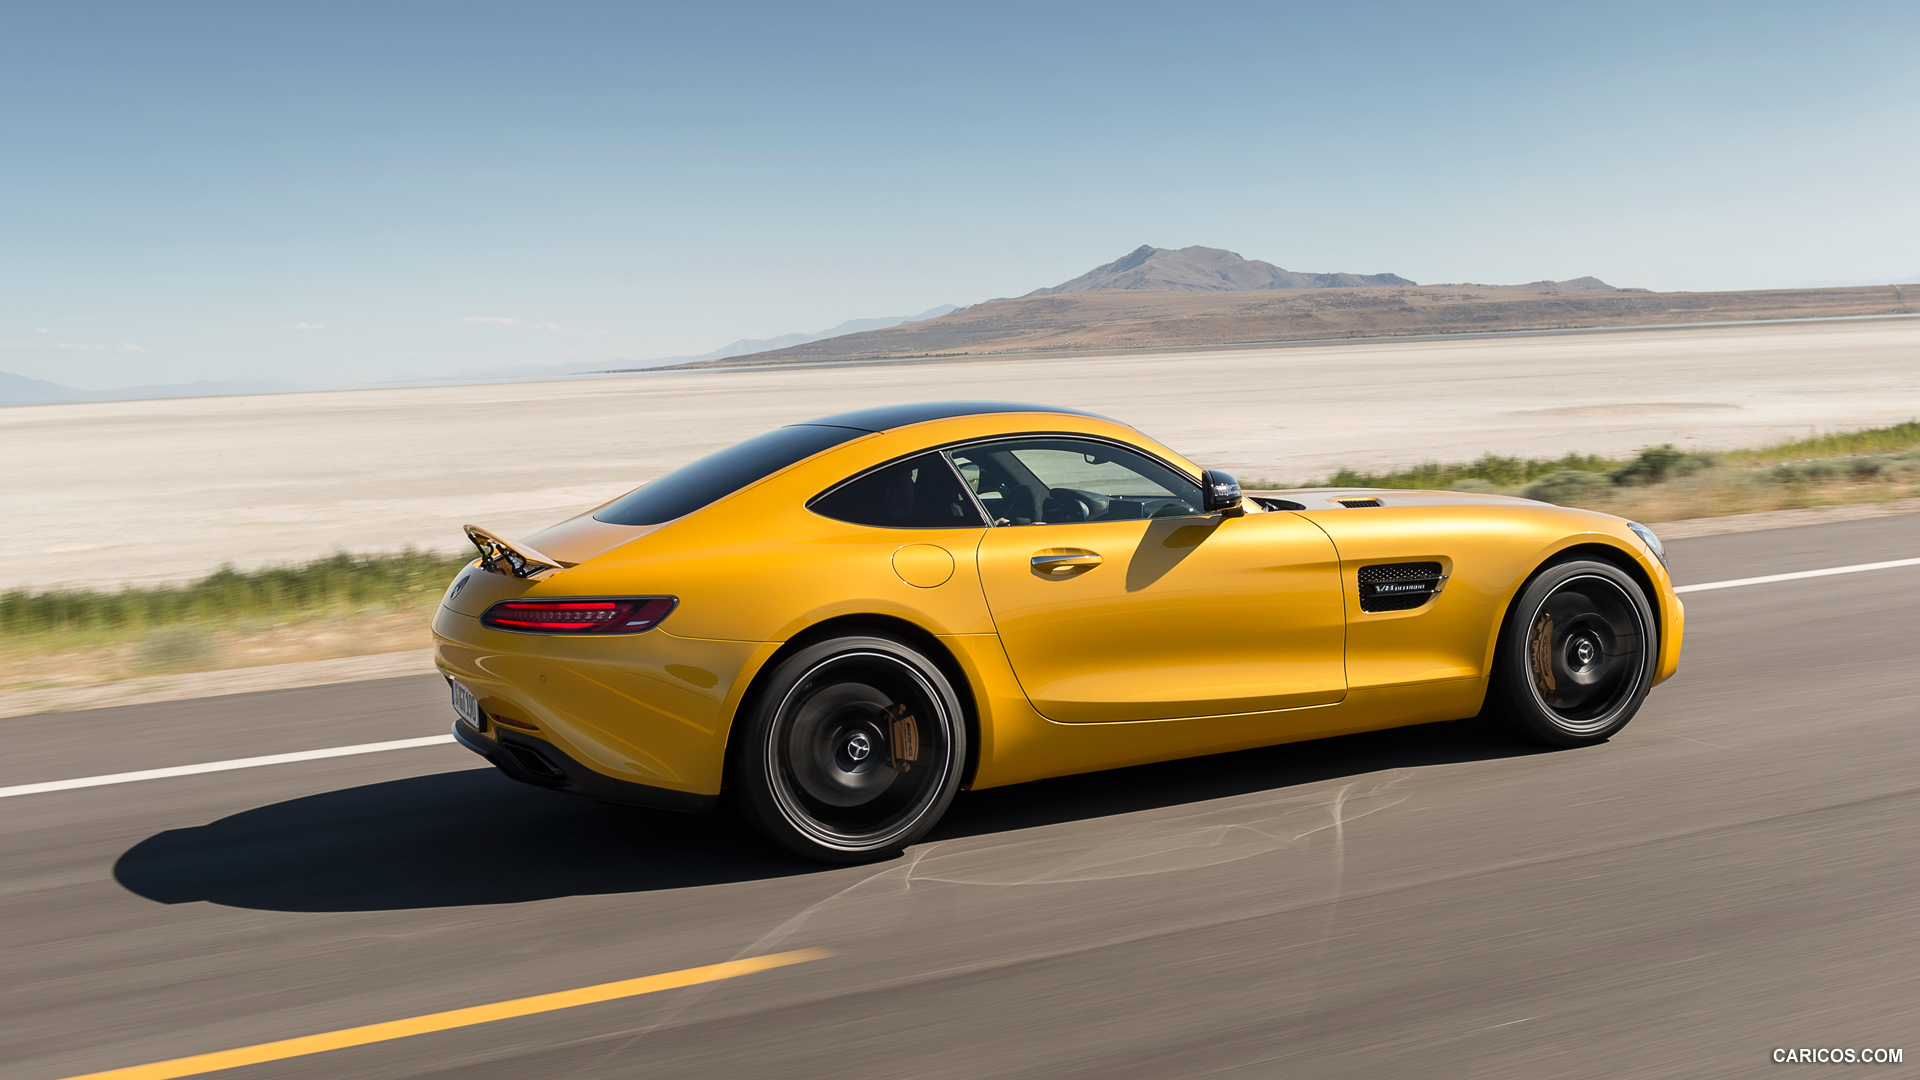 2016 Mercedes-AMG GT (Solarbeam) - Side, #77 of 190